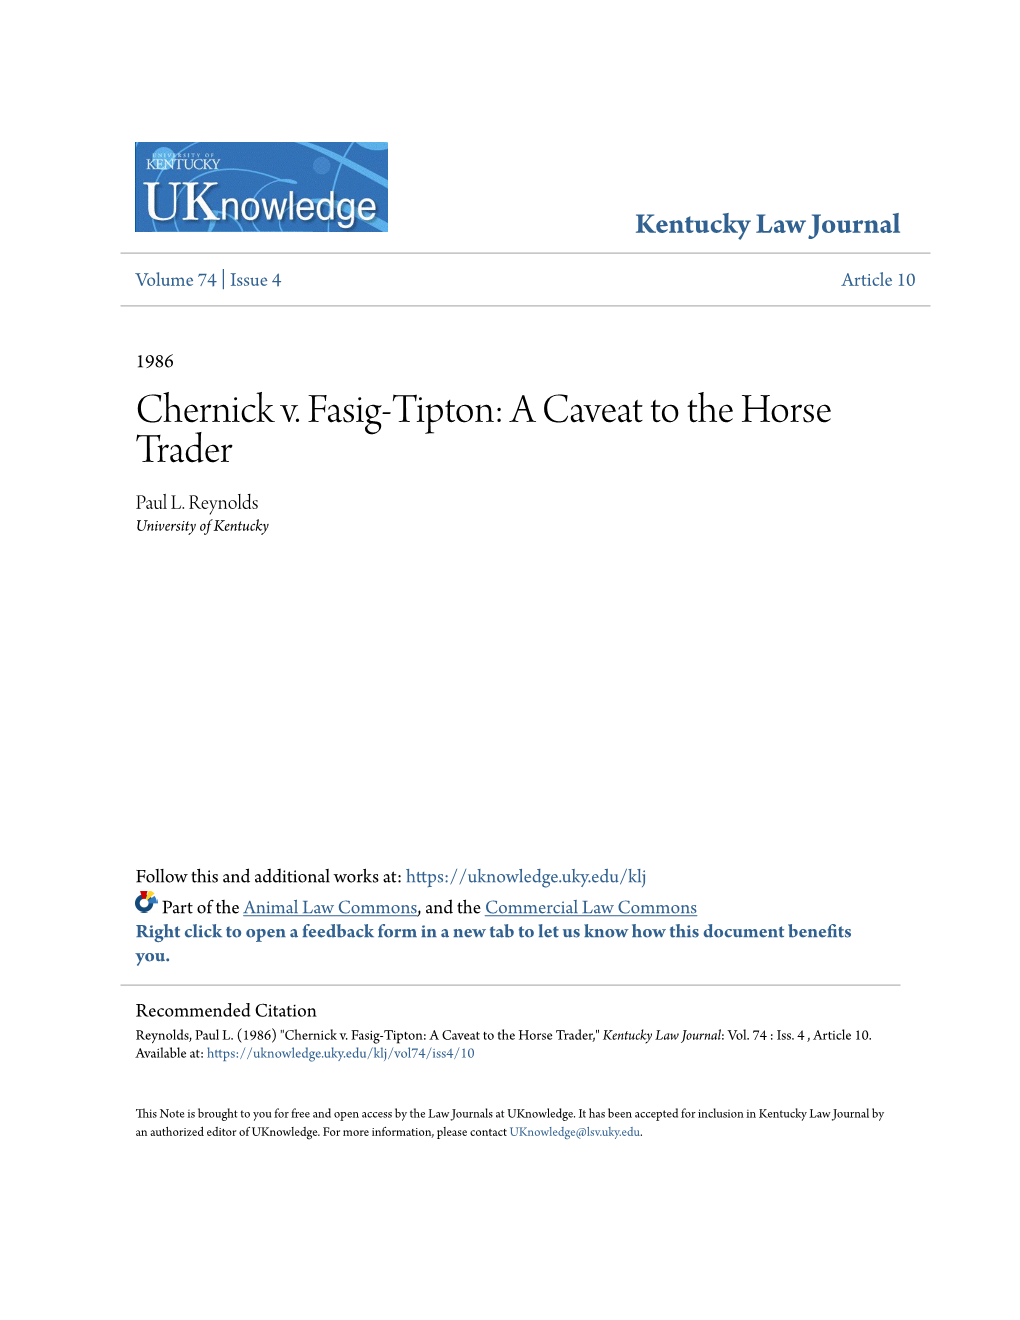 Chernick V. Fasig-Tipton: a Caveat to the Horse Trader Paul L